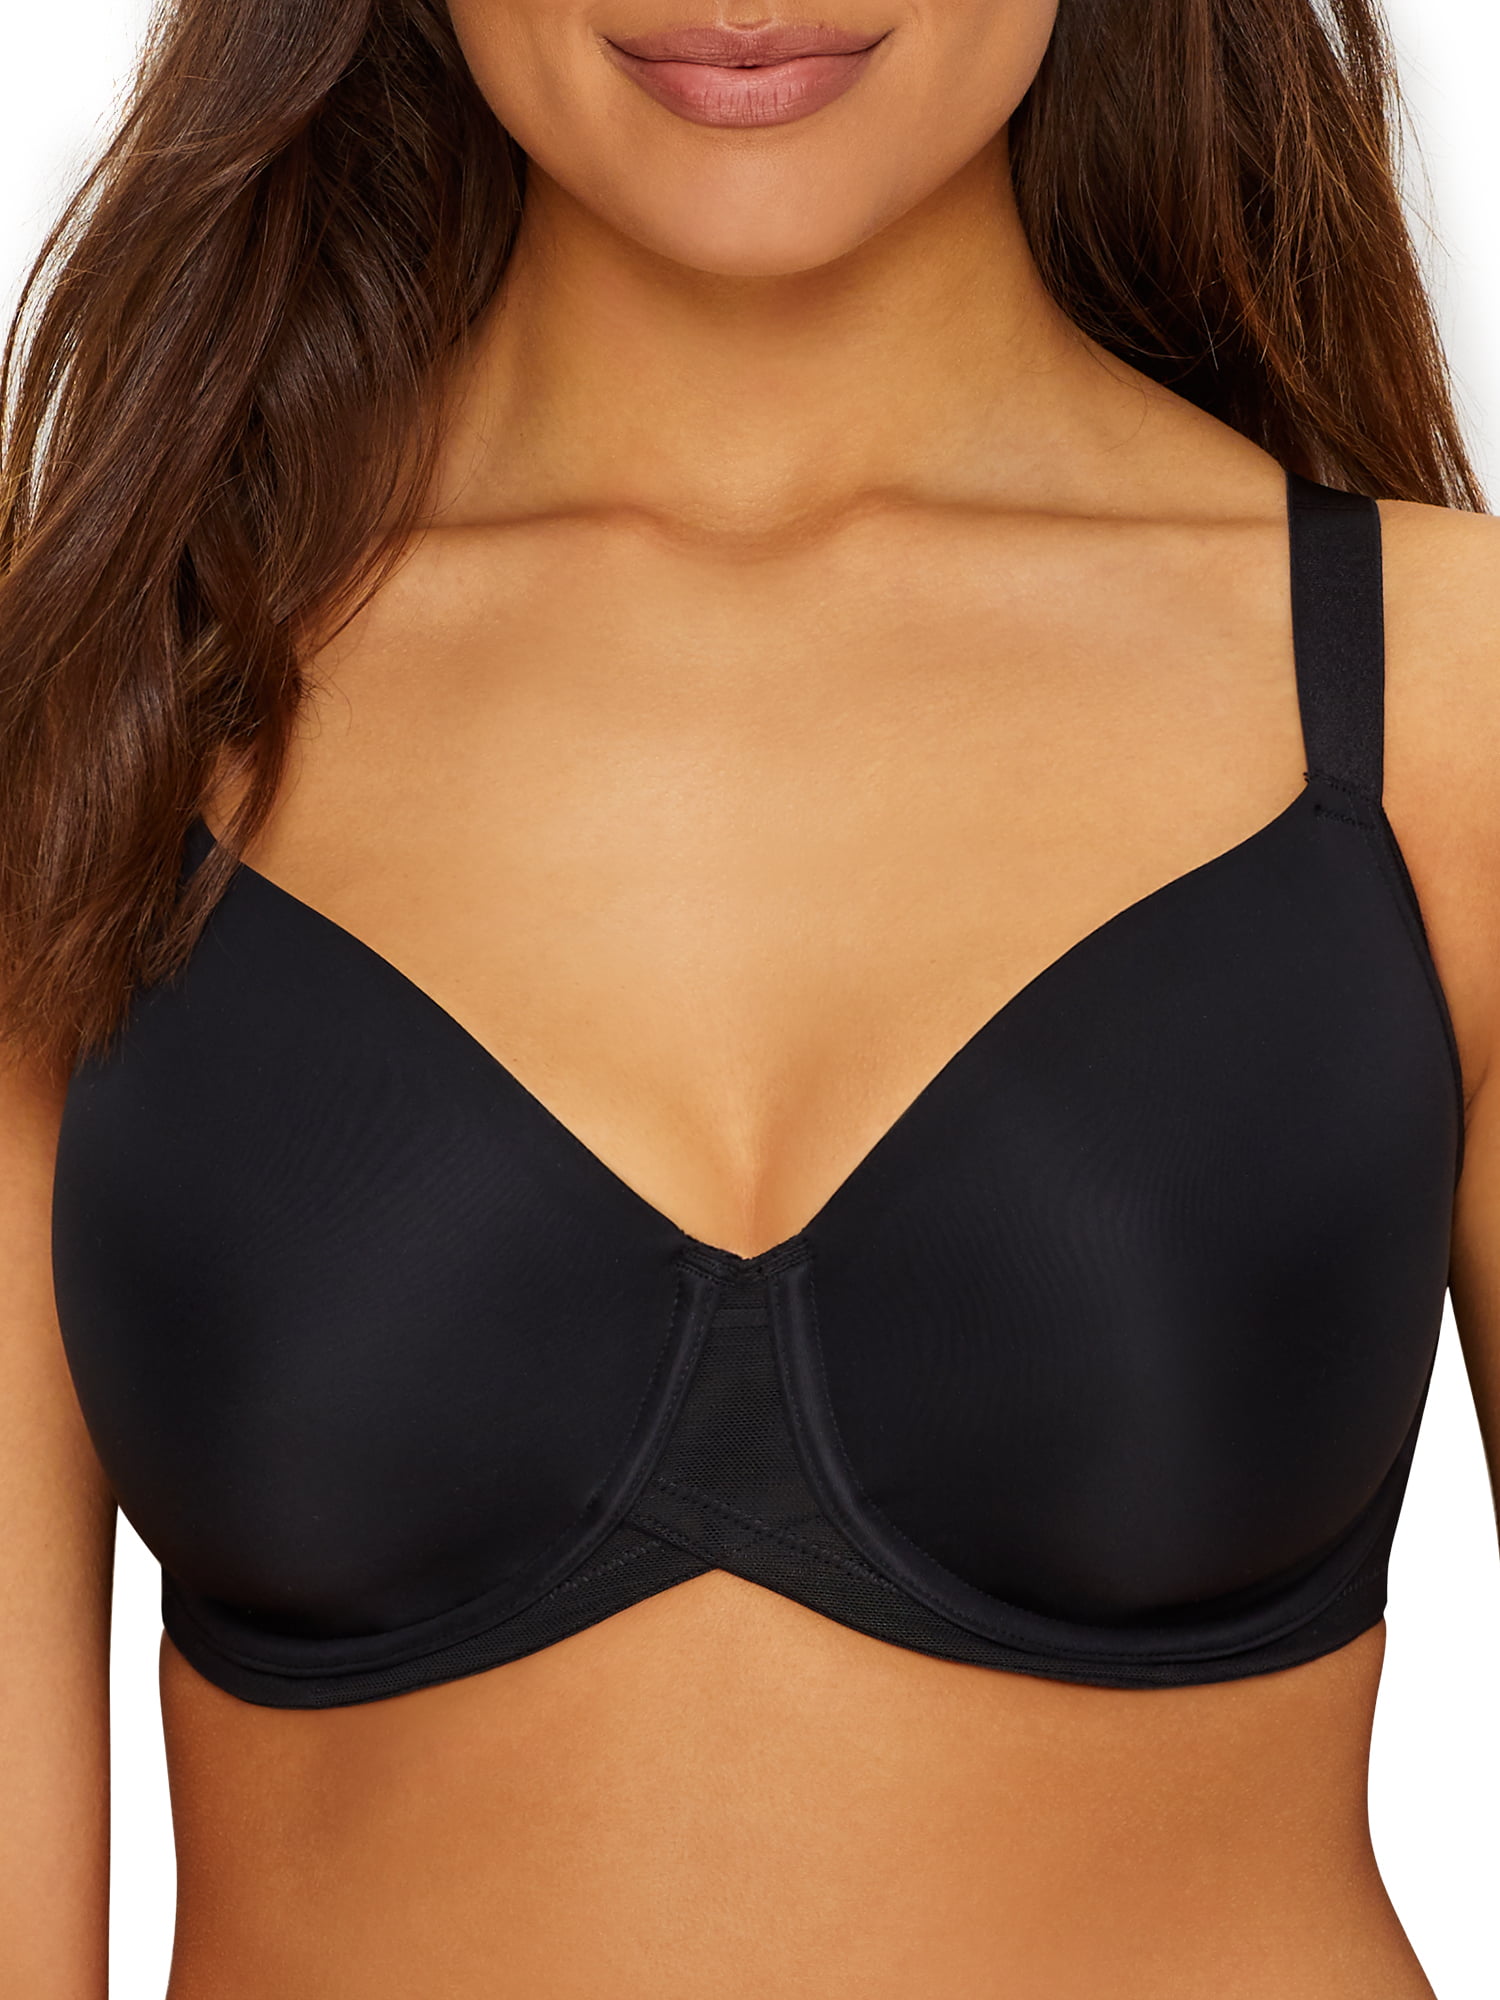 Paramour Womens Marvelous Side Smoothing T-Shirt Bra Style-245033 